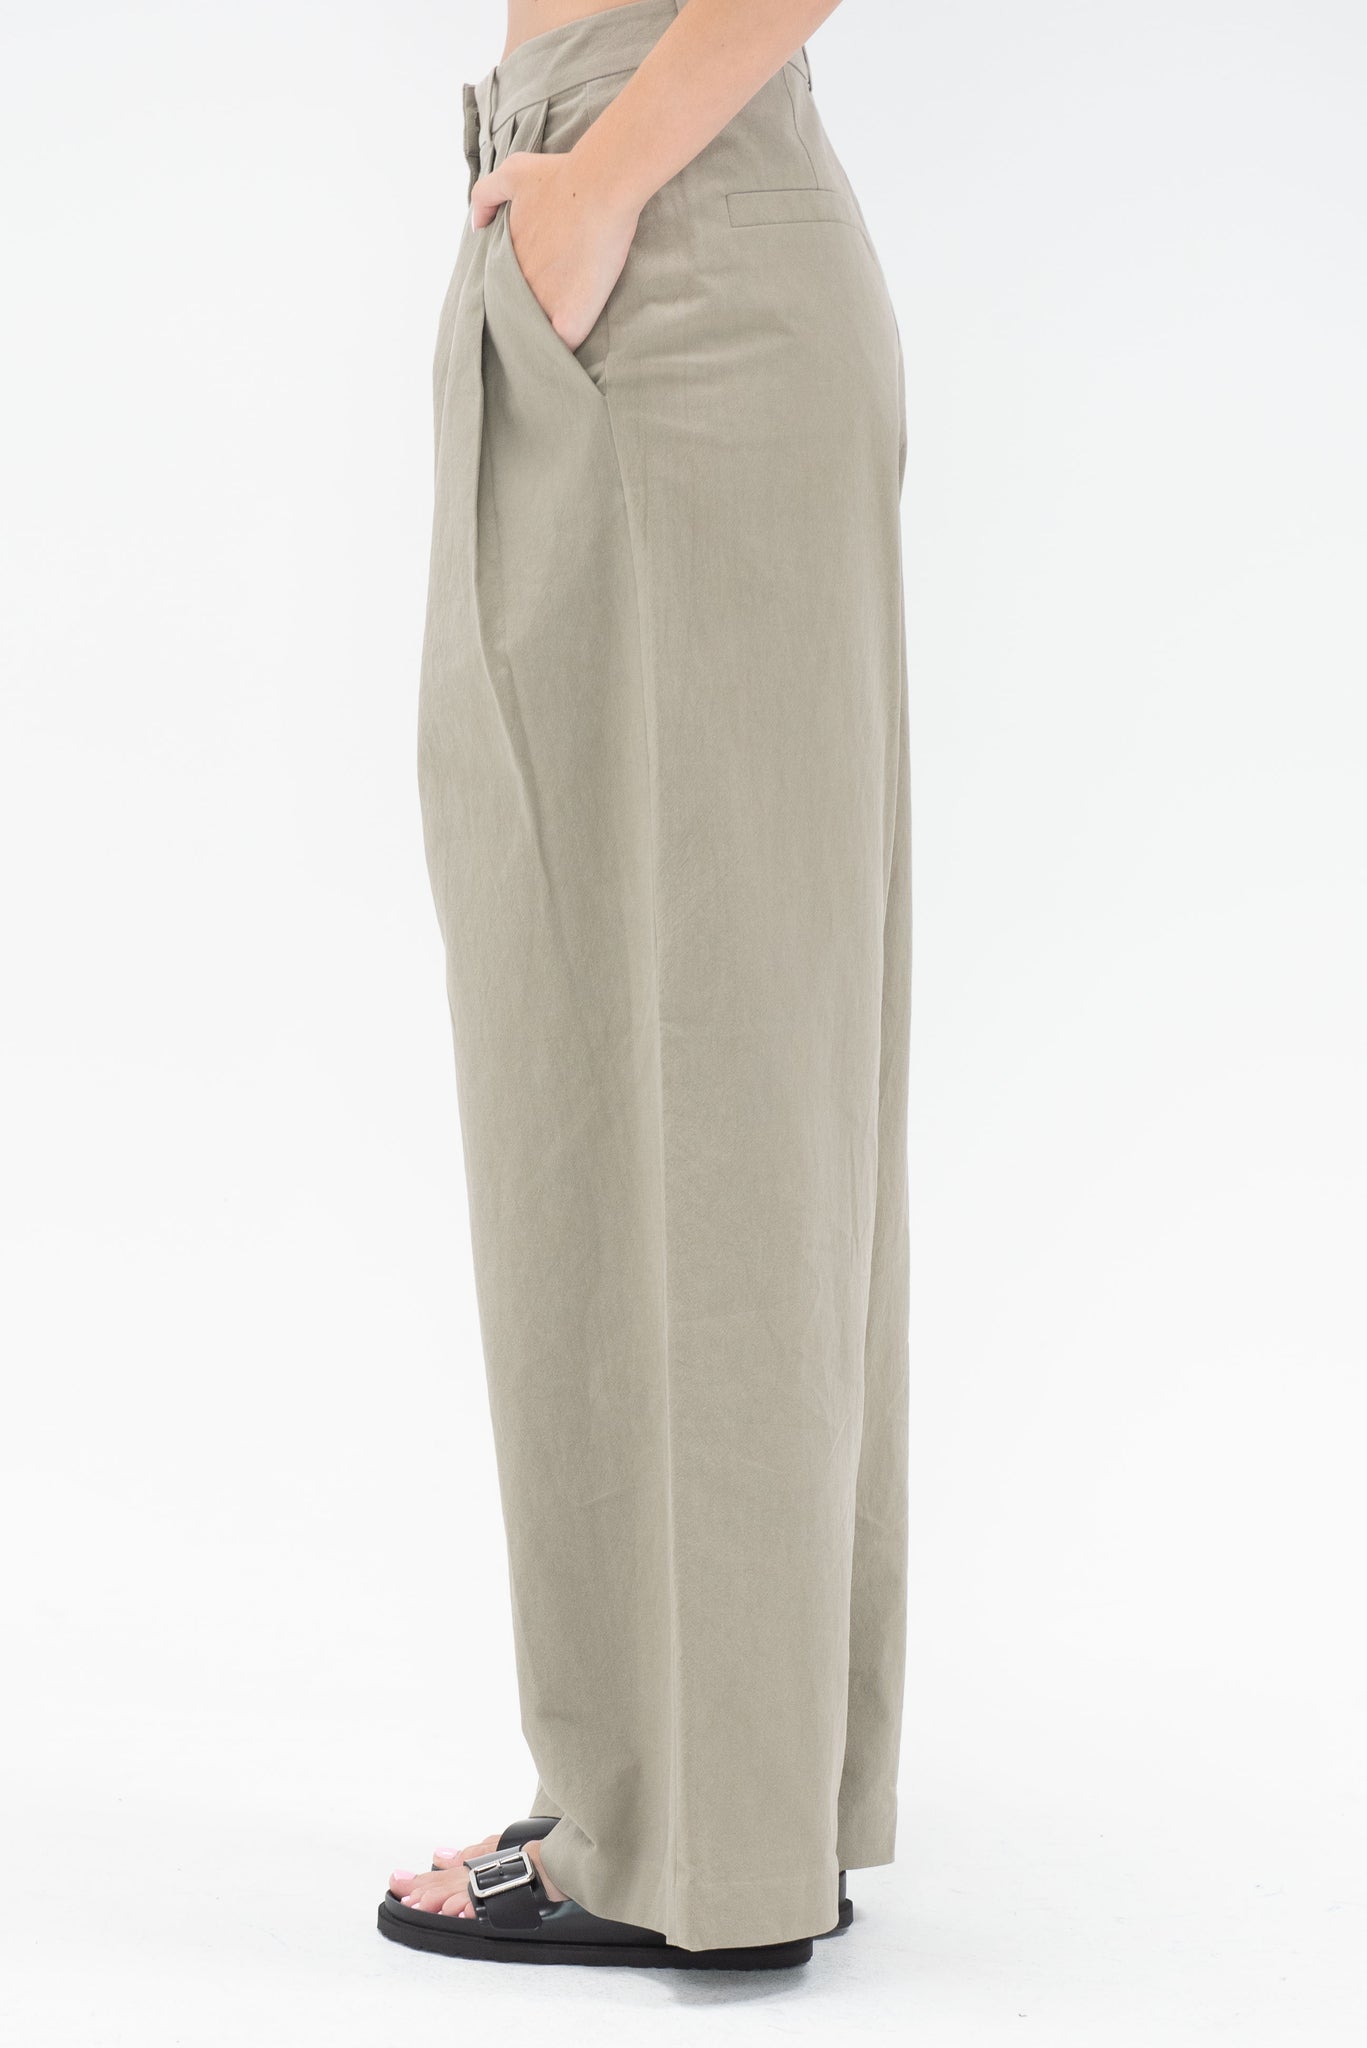 Proenza Schouler White Label - Helena Pant in Solid Crinkle Cotton, Bayleaf